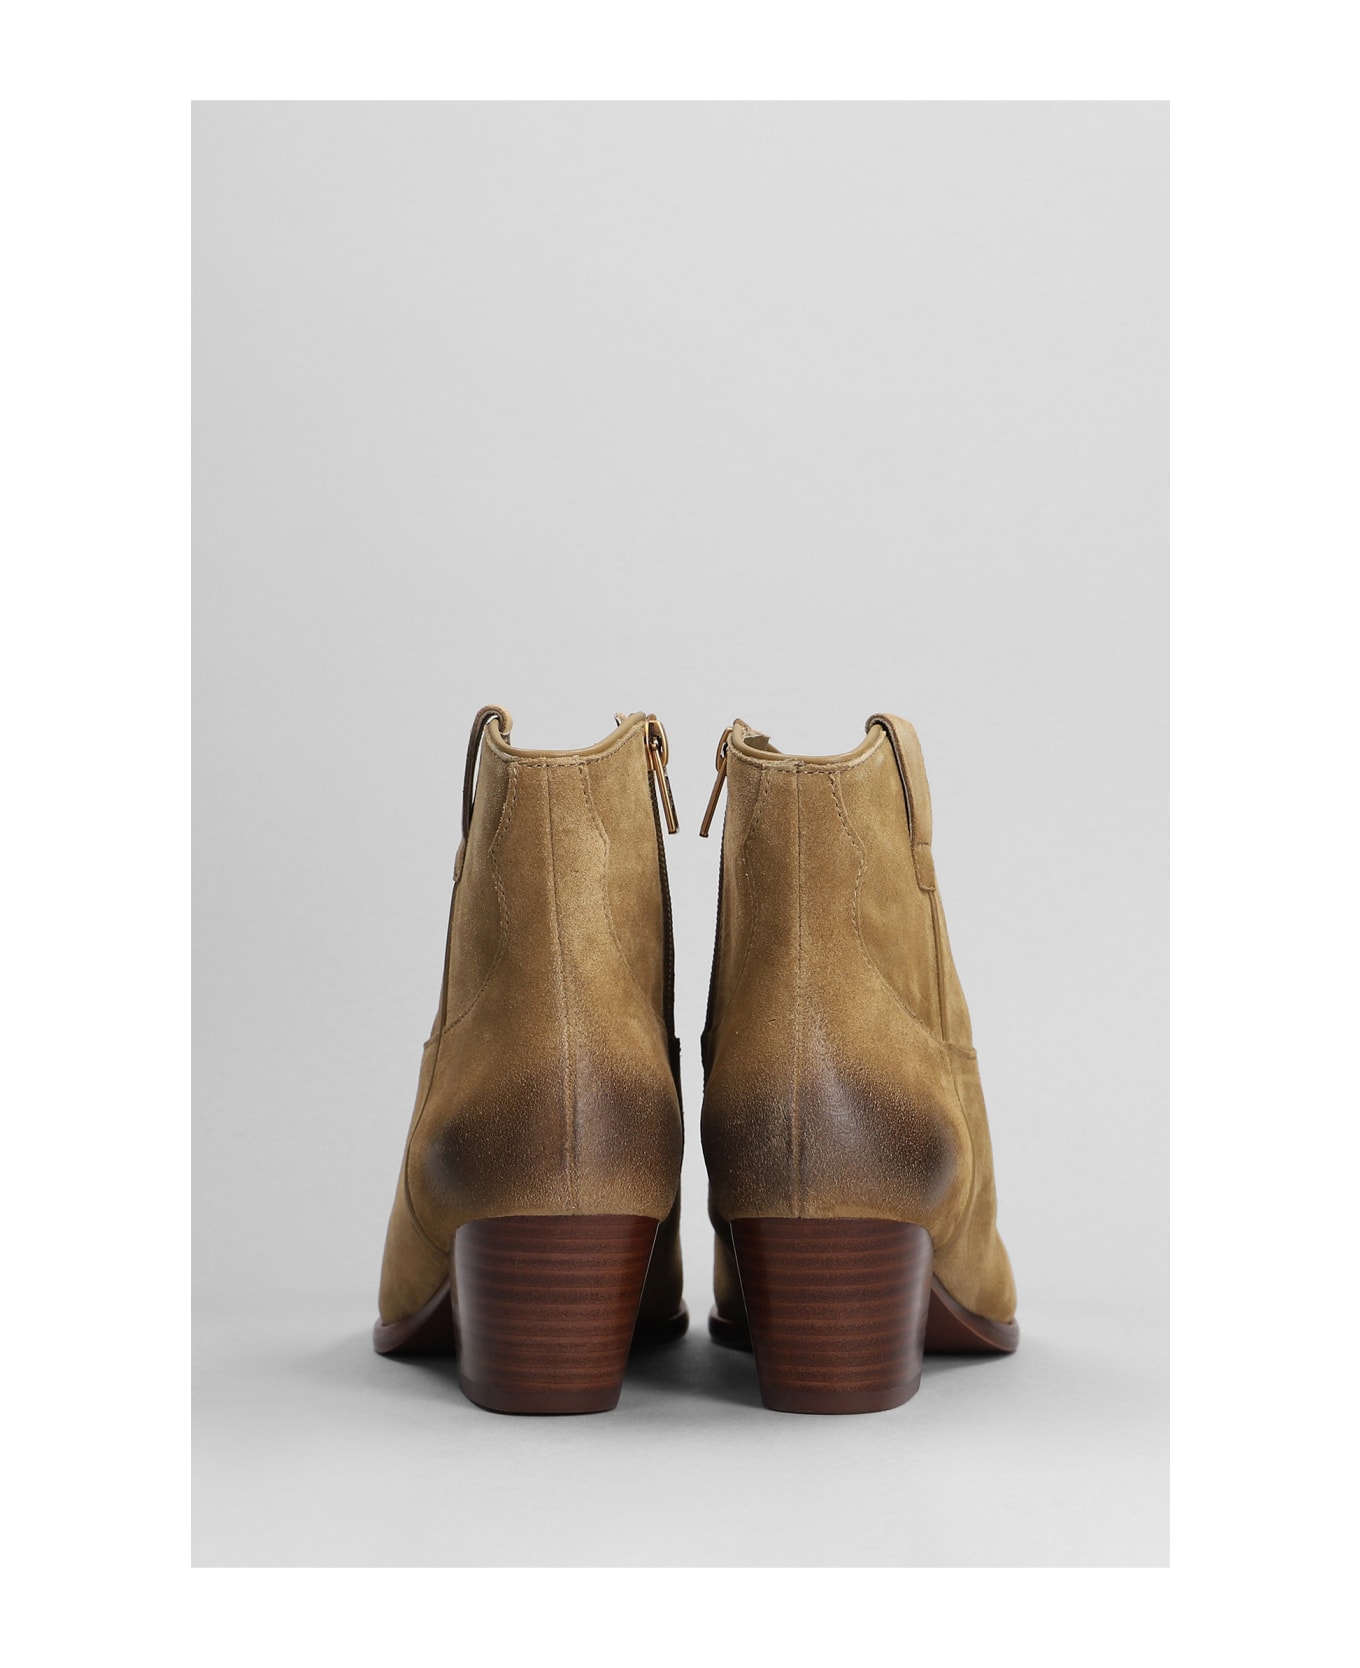 Ash Fame Texan Ankle Boots In Brown Suede - brown ブーツ